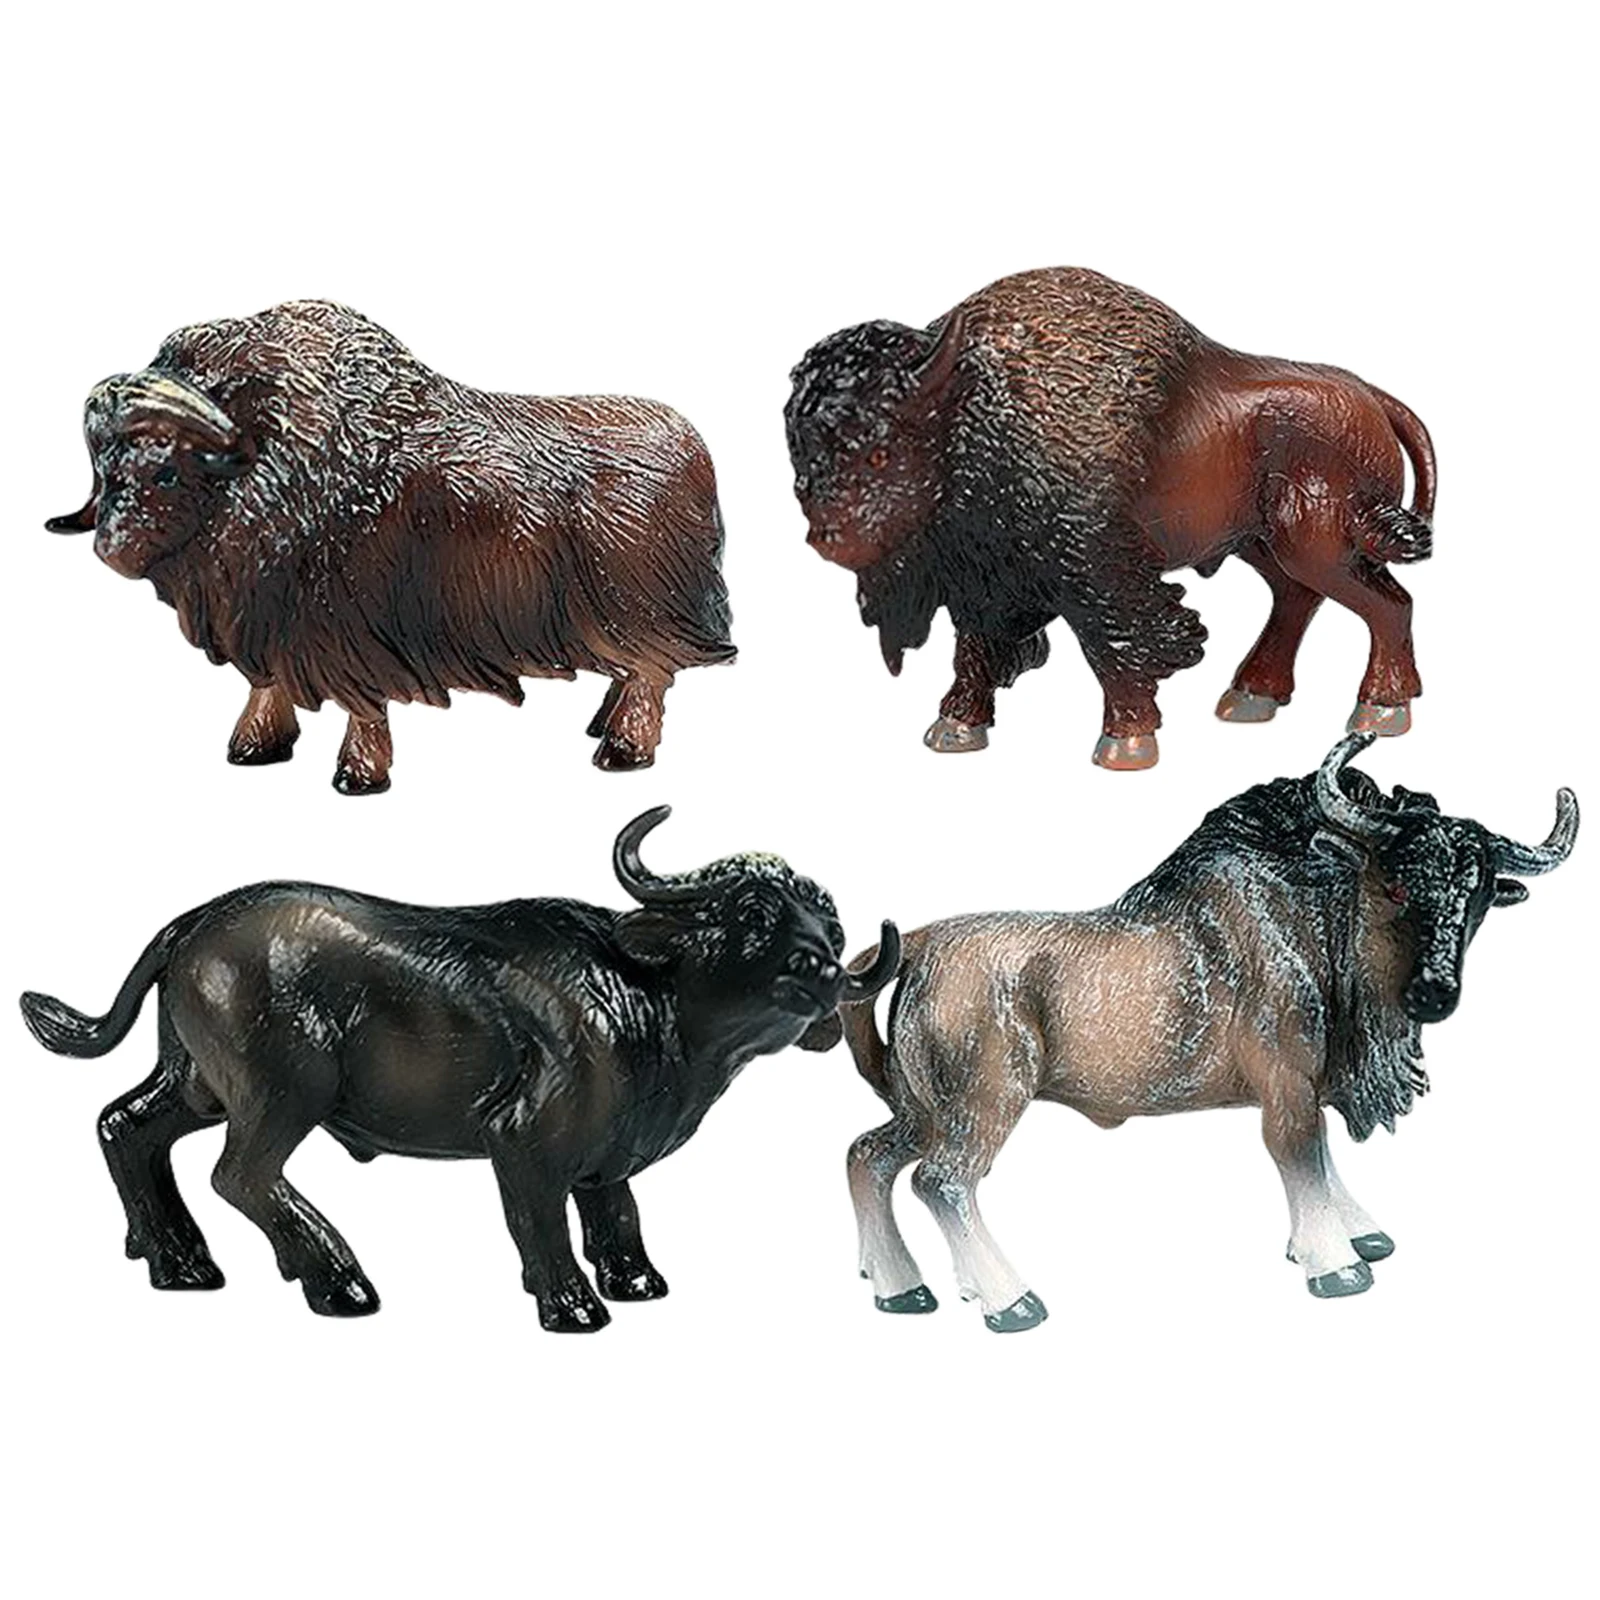 Educational Cow Figurine with Realistic Animals of Simulated Bull 4 Pieces for Children 3-8